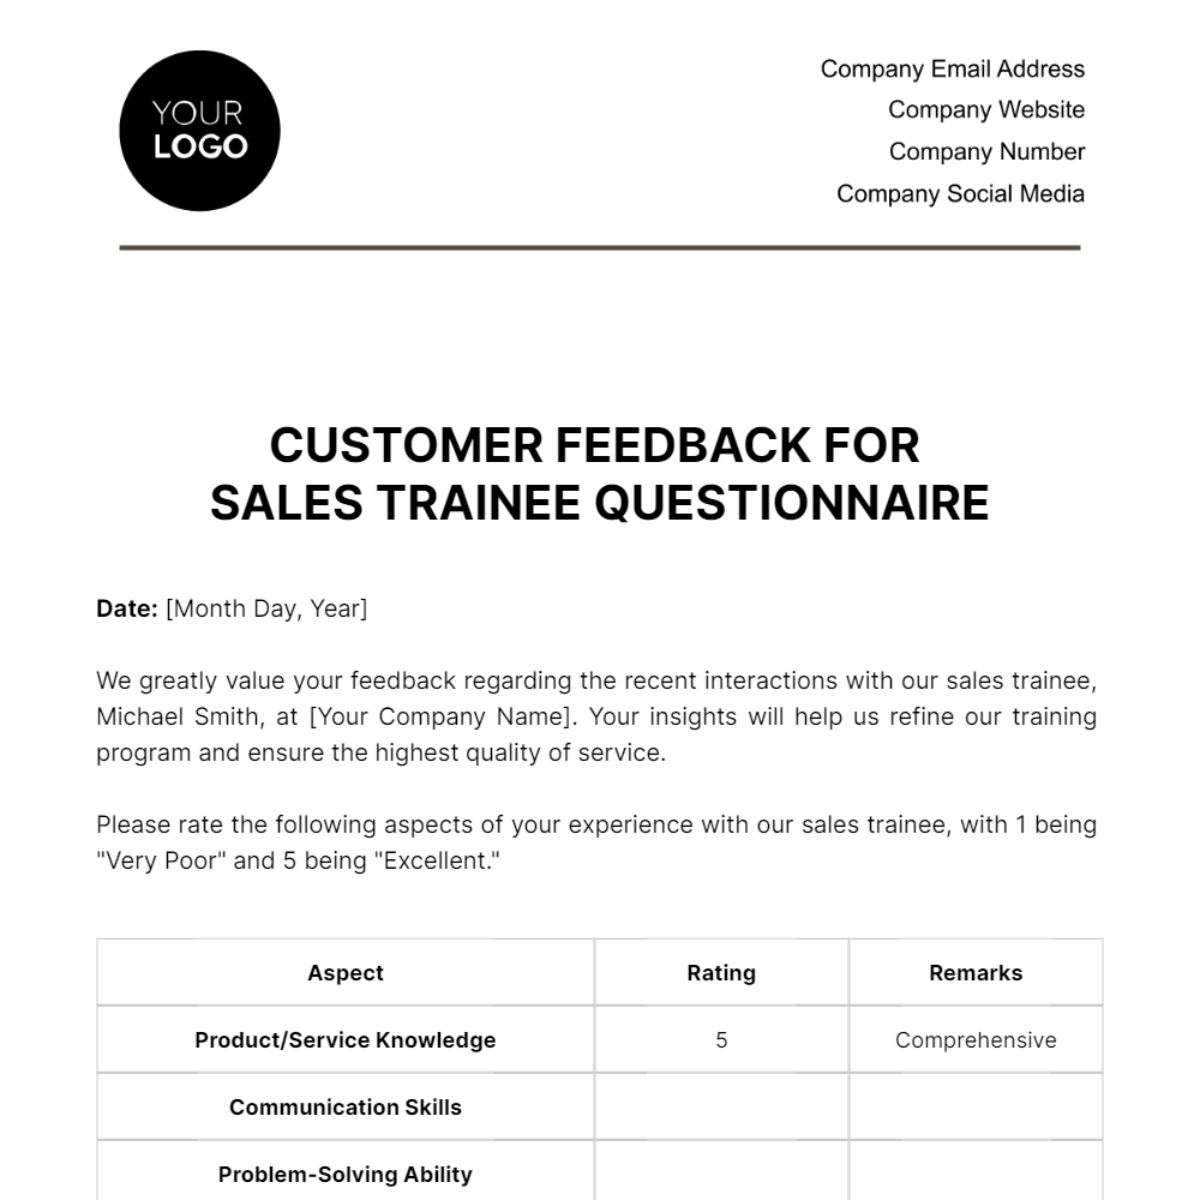 Customer Feedback for Sales Trainee Questionnaire Template